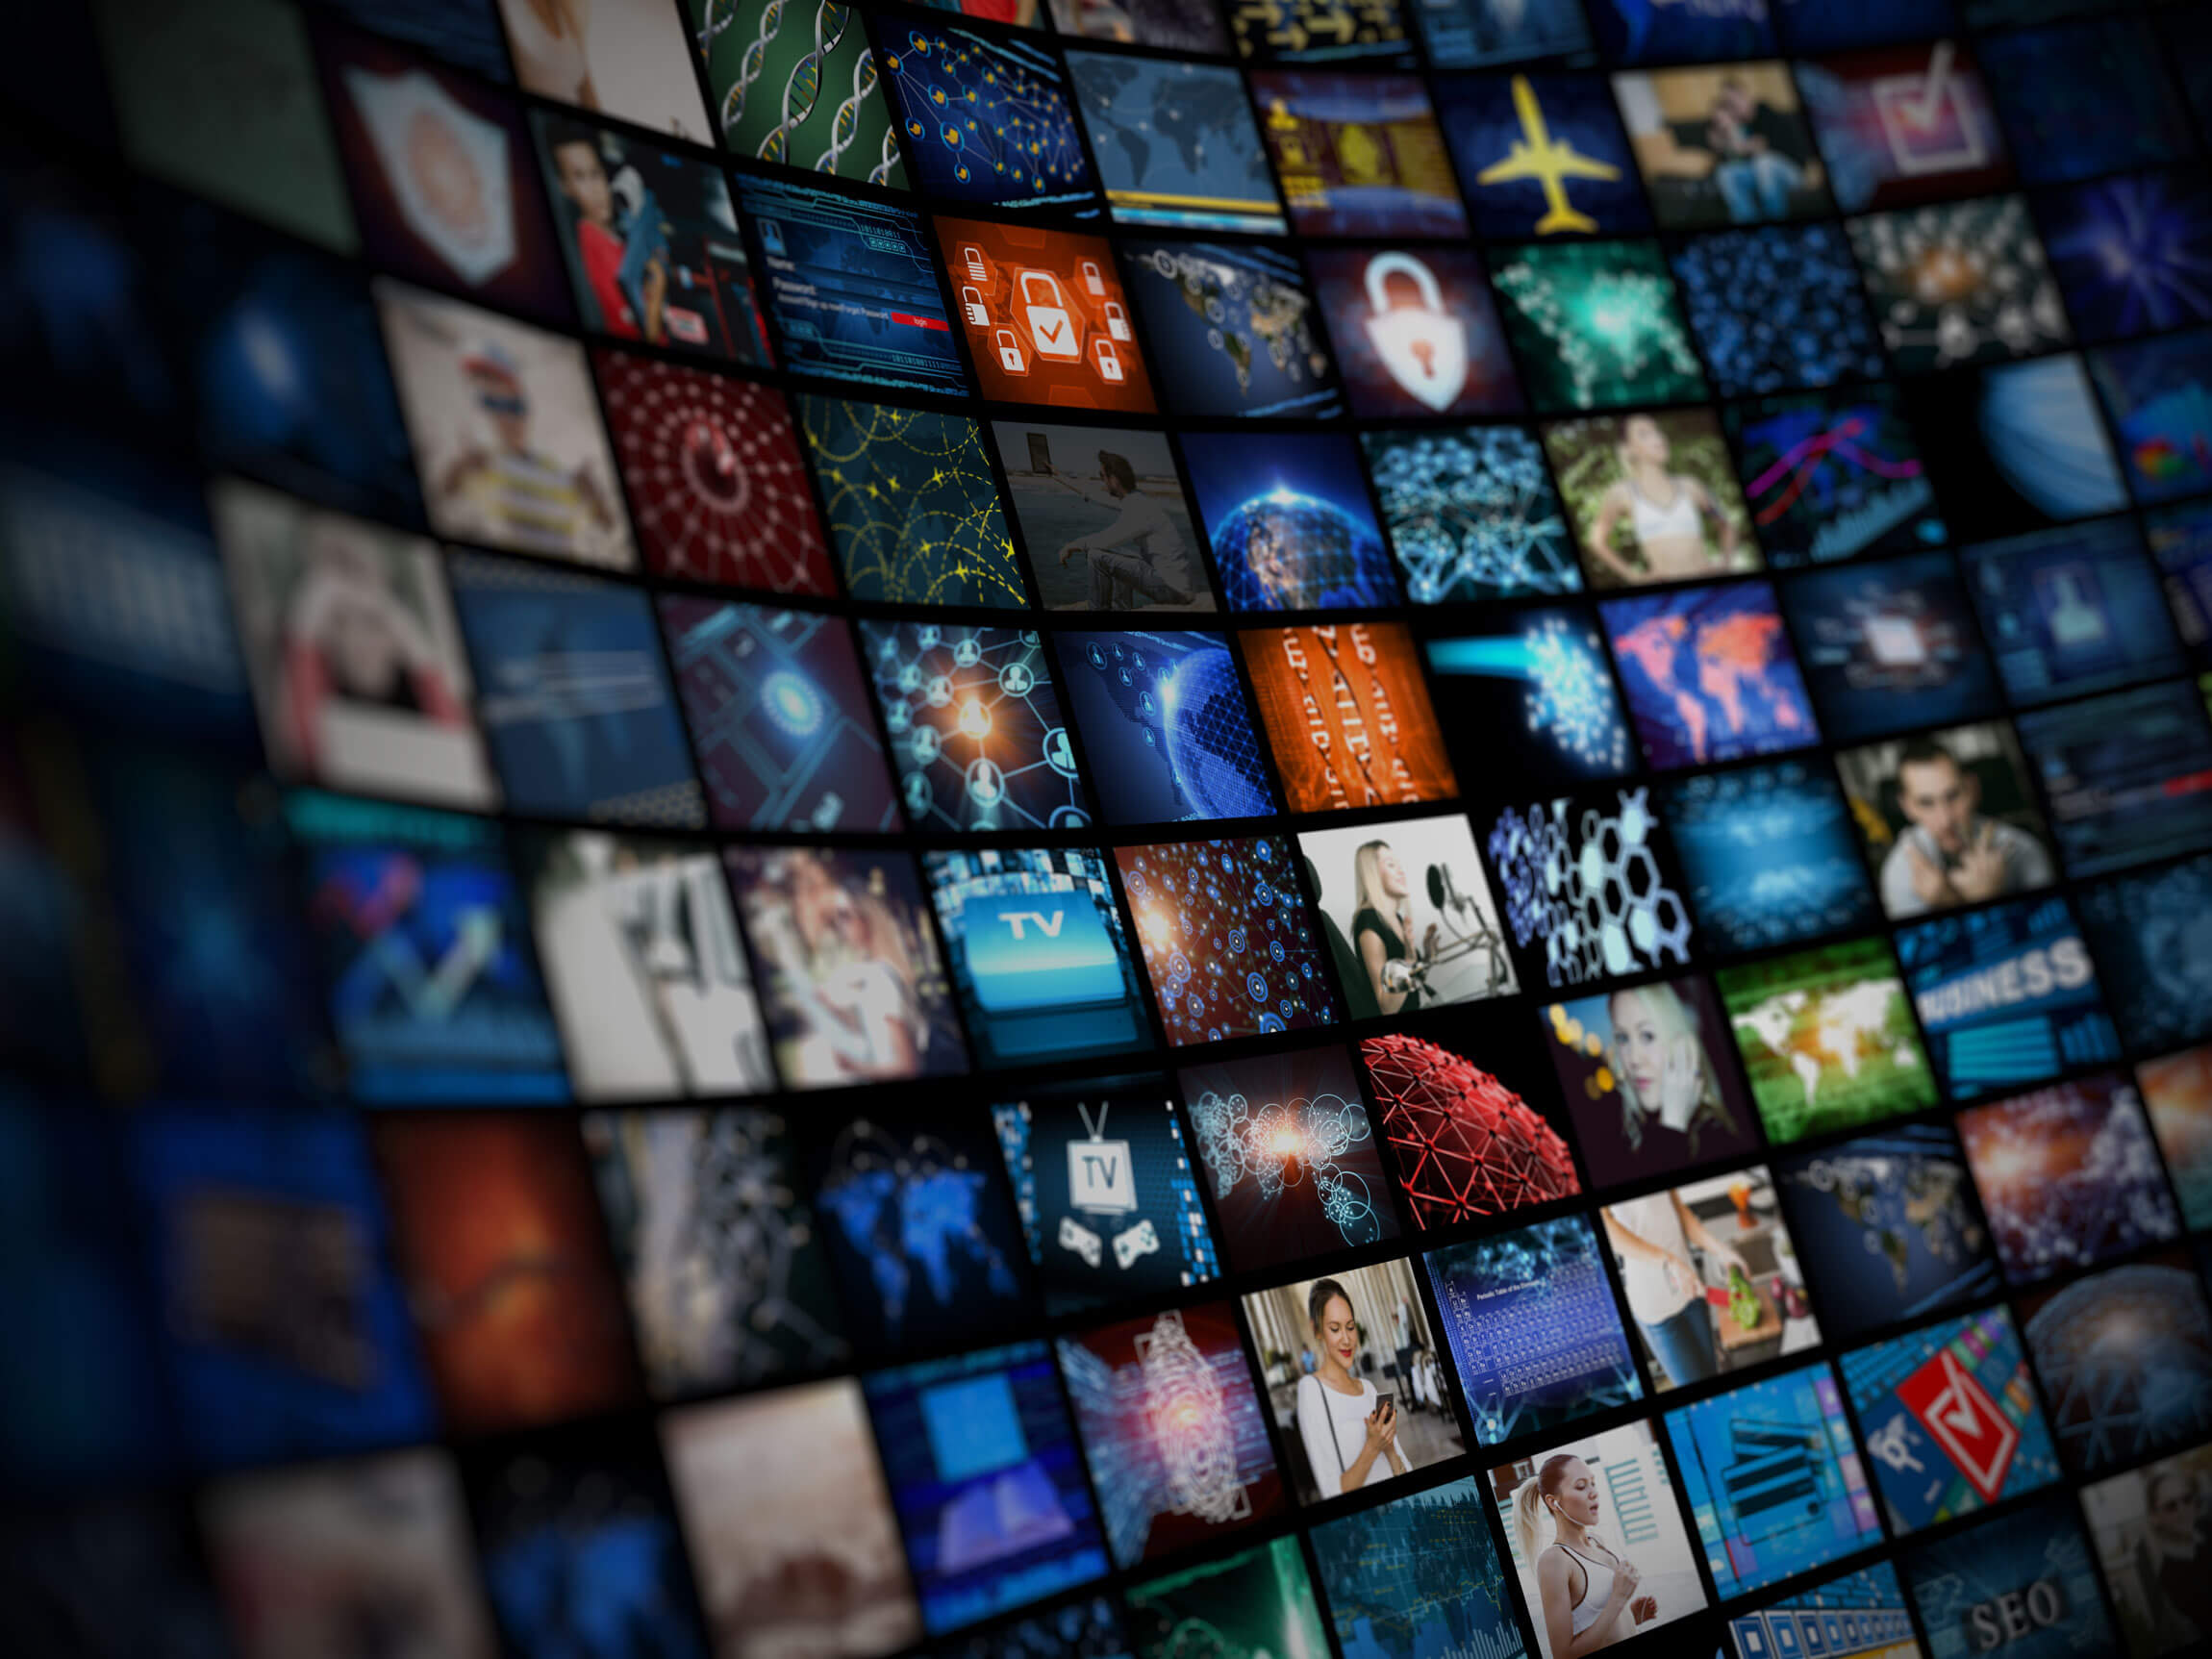 Think digital has squeezed out TV and radio? Think again